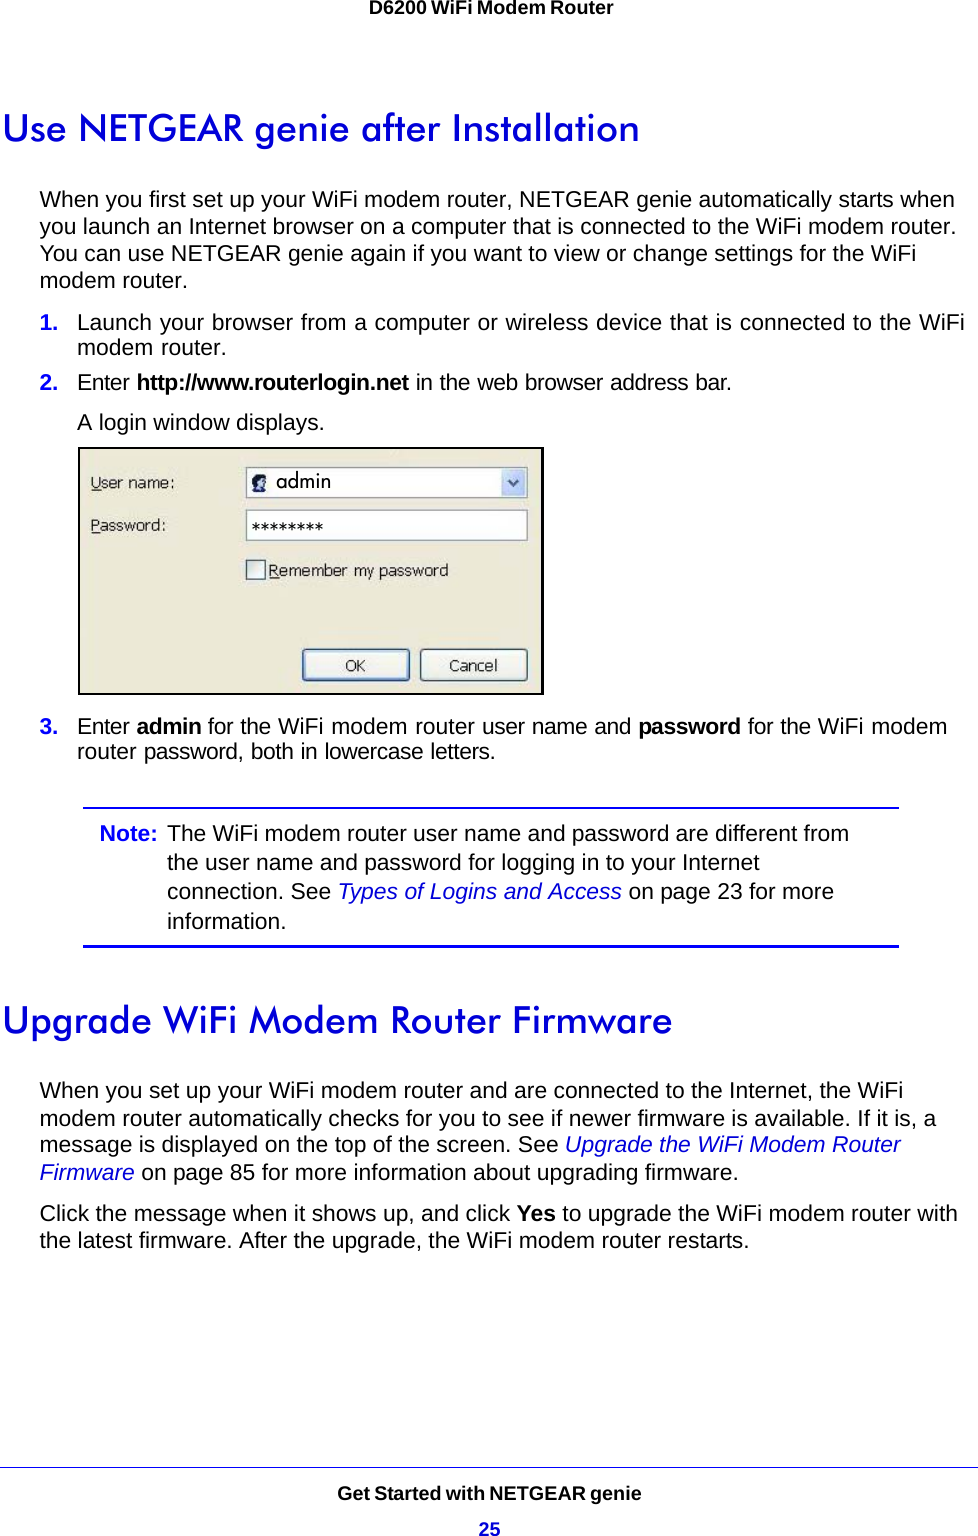 Get Started with NETGEAR genie25 D6200 WiFi Modem RouterUse NETGEAR genie after InstallationWhen you first set up your WiFi modem router, NETGEAR genie automatically starts when you launch an Internet browser on a computer that is connected to the WiFi modem router. You can use NETGEAR genie again if you want to view or change settings for the WiFi modem router.1. Launch your browser from a computer or wireless device that is connected to the WiFi modem router.2. Enter http://www.routerlogin.net in the web browser address bar.A login window displays.admin********3. Enter admin for the WiFi modem router user name and password for the WiFi modem router password, both in lowercase letters. Note: The WiFi modem router user name and password are different from the user name and password for logging in to your Internet connection. See Types of Logins and Access on page 23 for more information.Upgrade WiFi Modem Router FirmwareWhen you set up your WiFi modem router and are connected to the Internet, the WiFi modem router automatically checks for you to see if newer firmware is available. If it is, a message is displayed on the top of the screen. See Upgrade the WiFi Modem Router Firmware on page 85 for more information about upgrading firmware.Click the message when it shows up, and click Yes to upgrade the WiFi modem router with the latest firmware. After the upgrade, the WiFi modem router restarts.